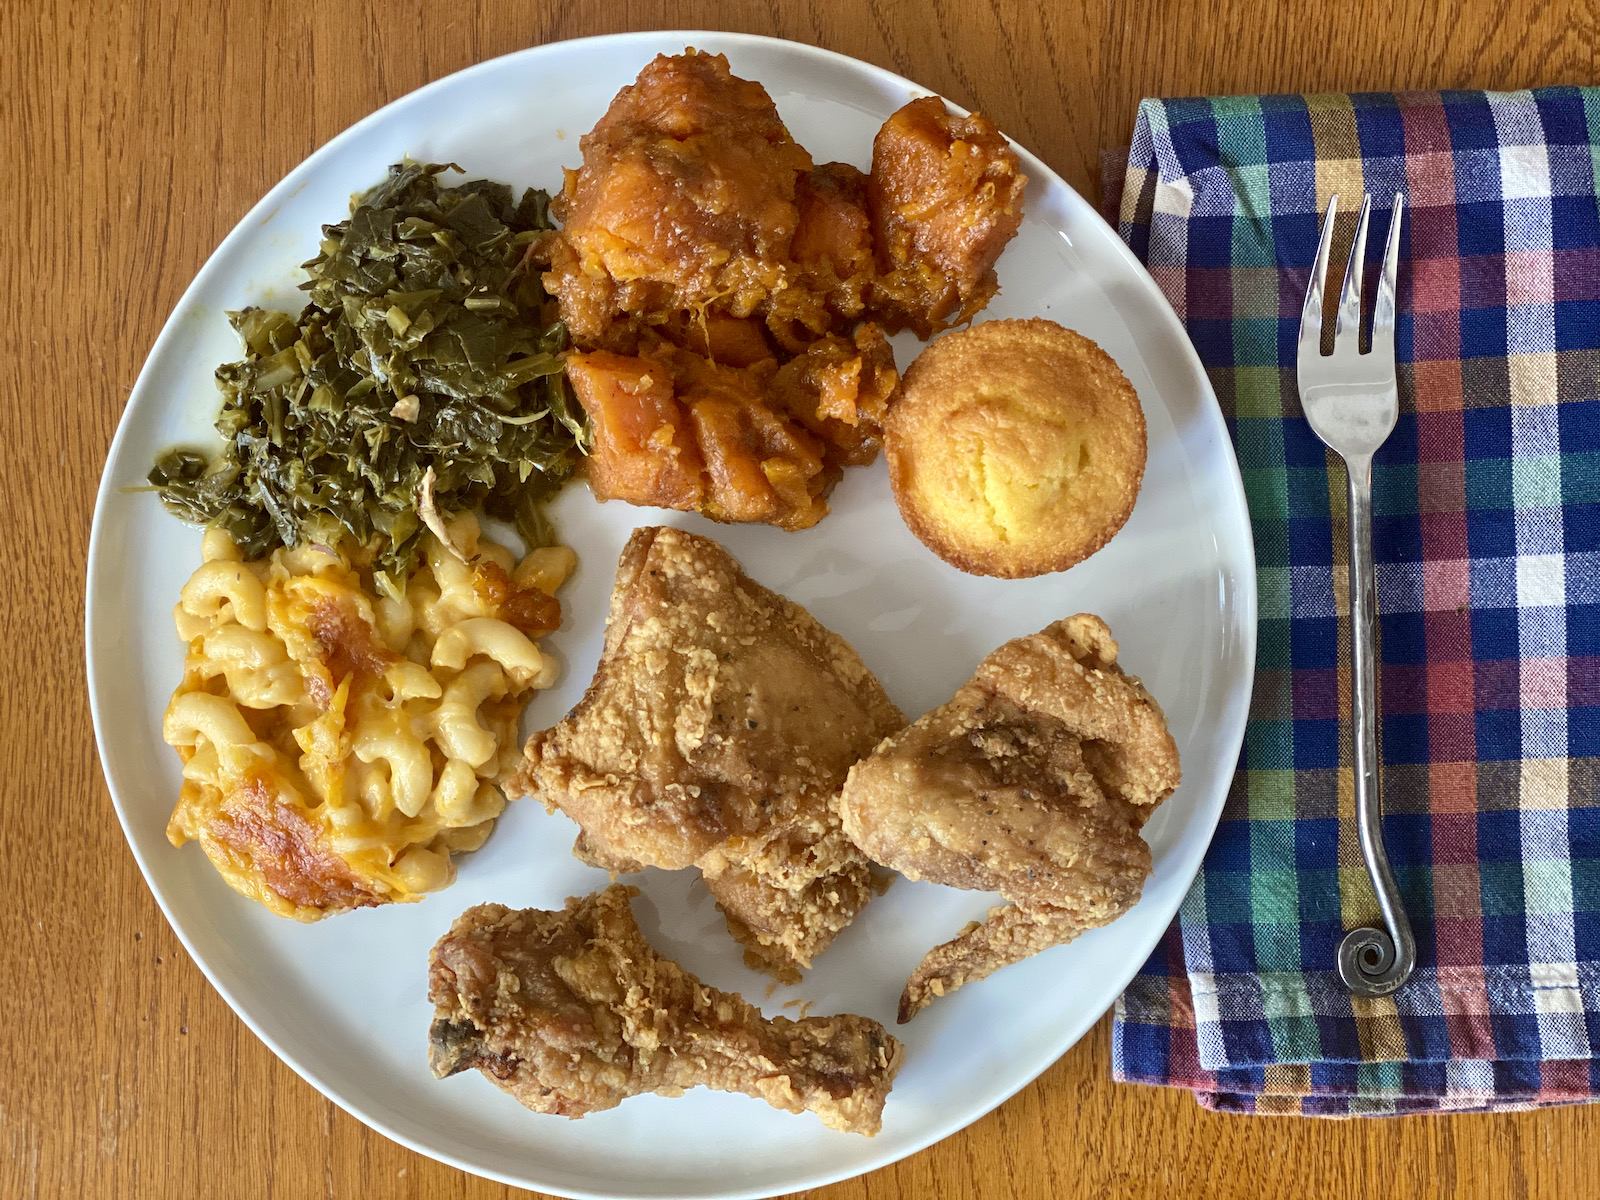 Plate from Daddy's Soul Food & Grill